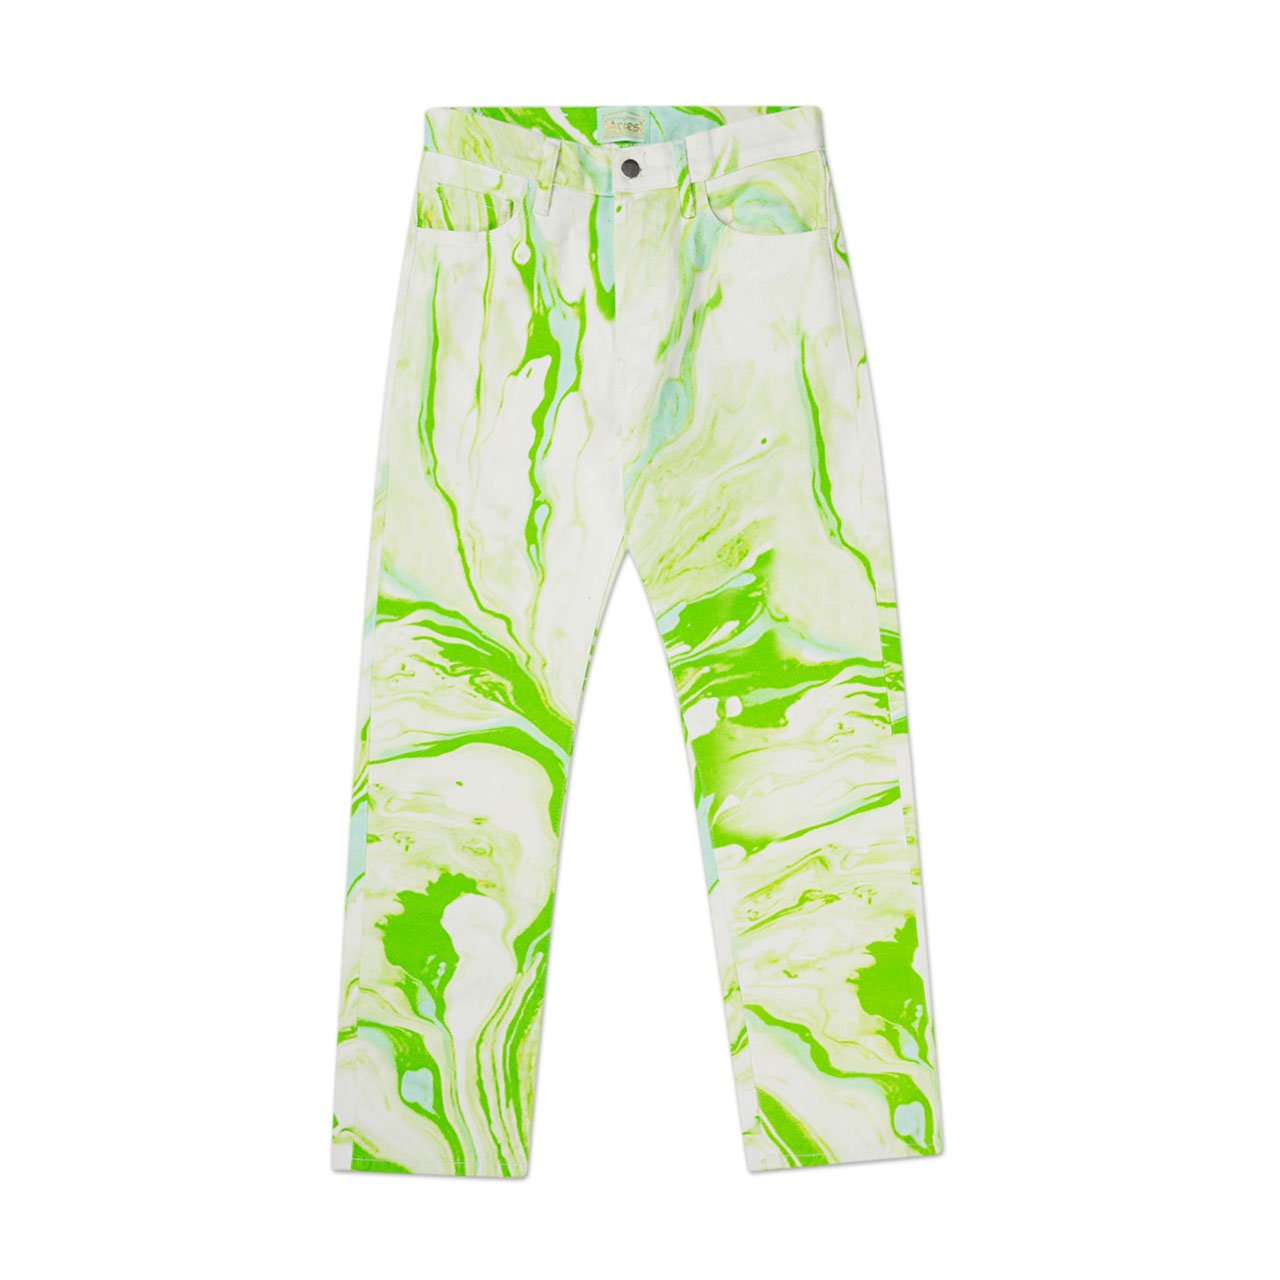 aries marble lilly jeans (white / green) - frar30501-30 - a.plus - Image - 1